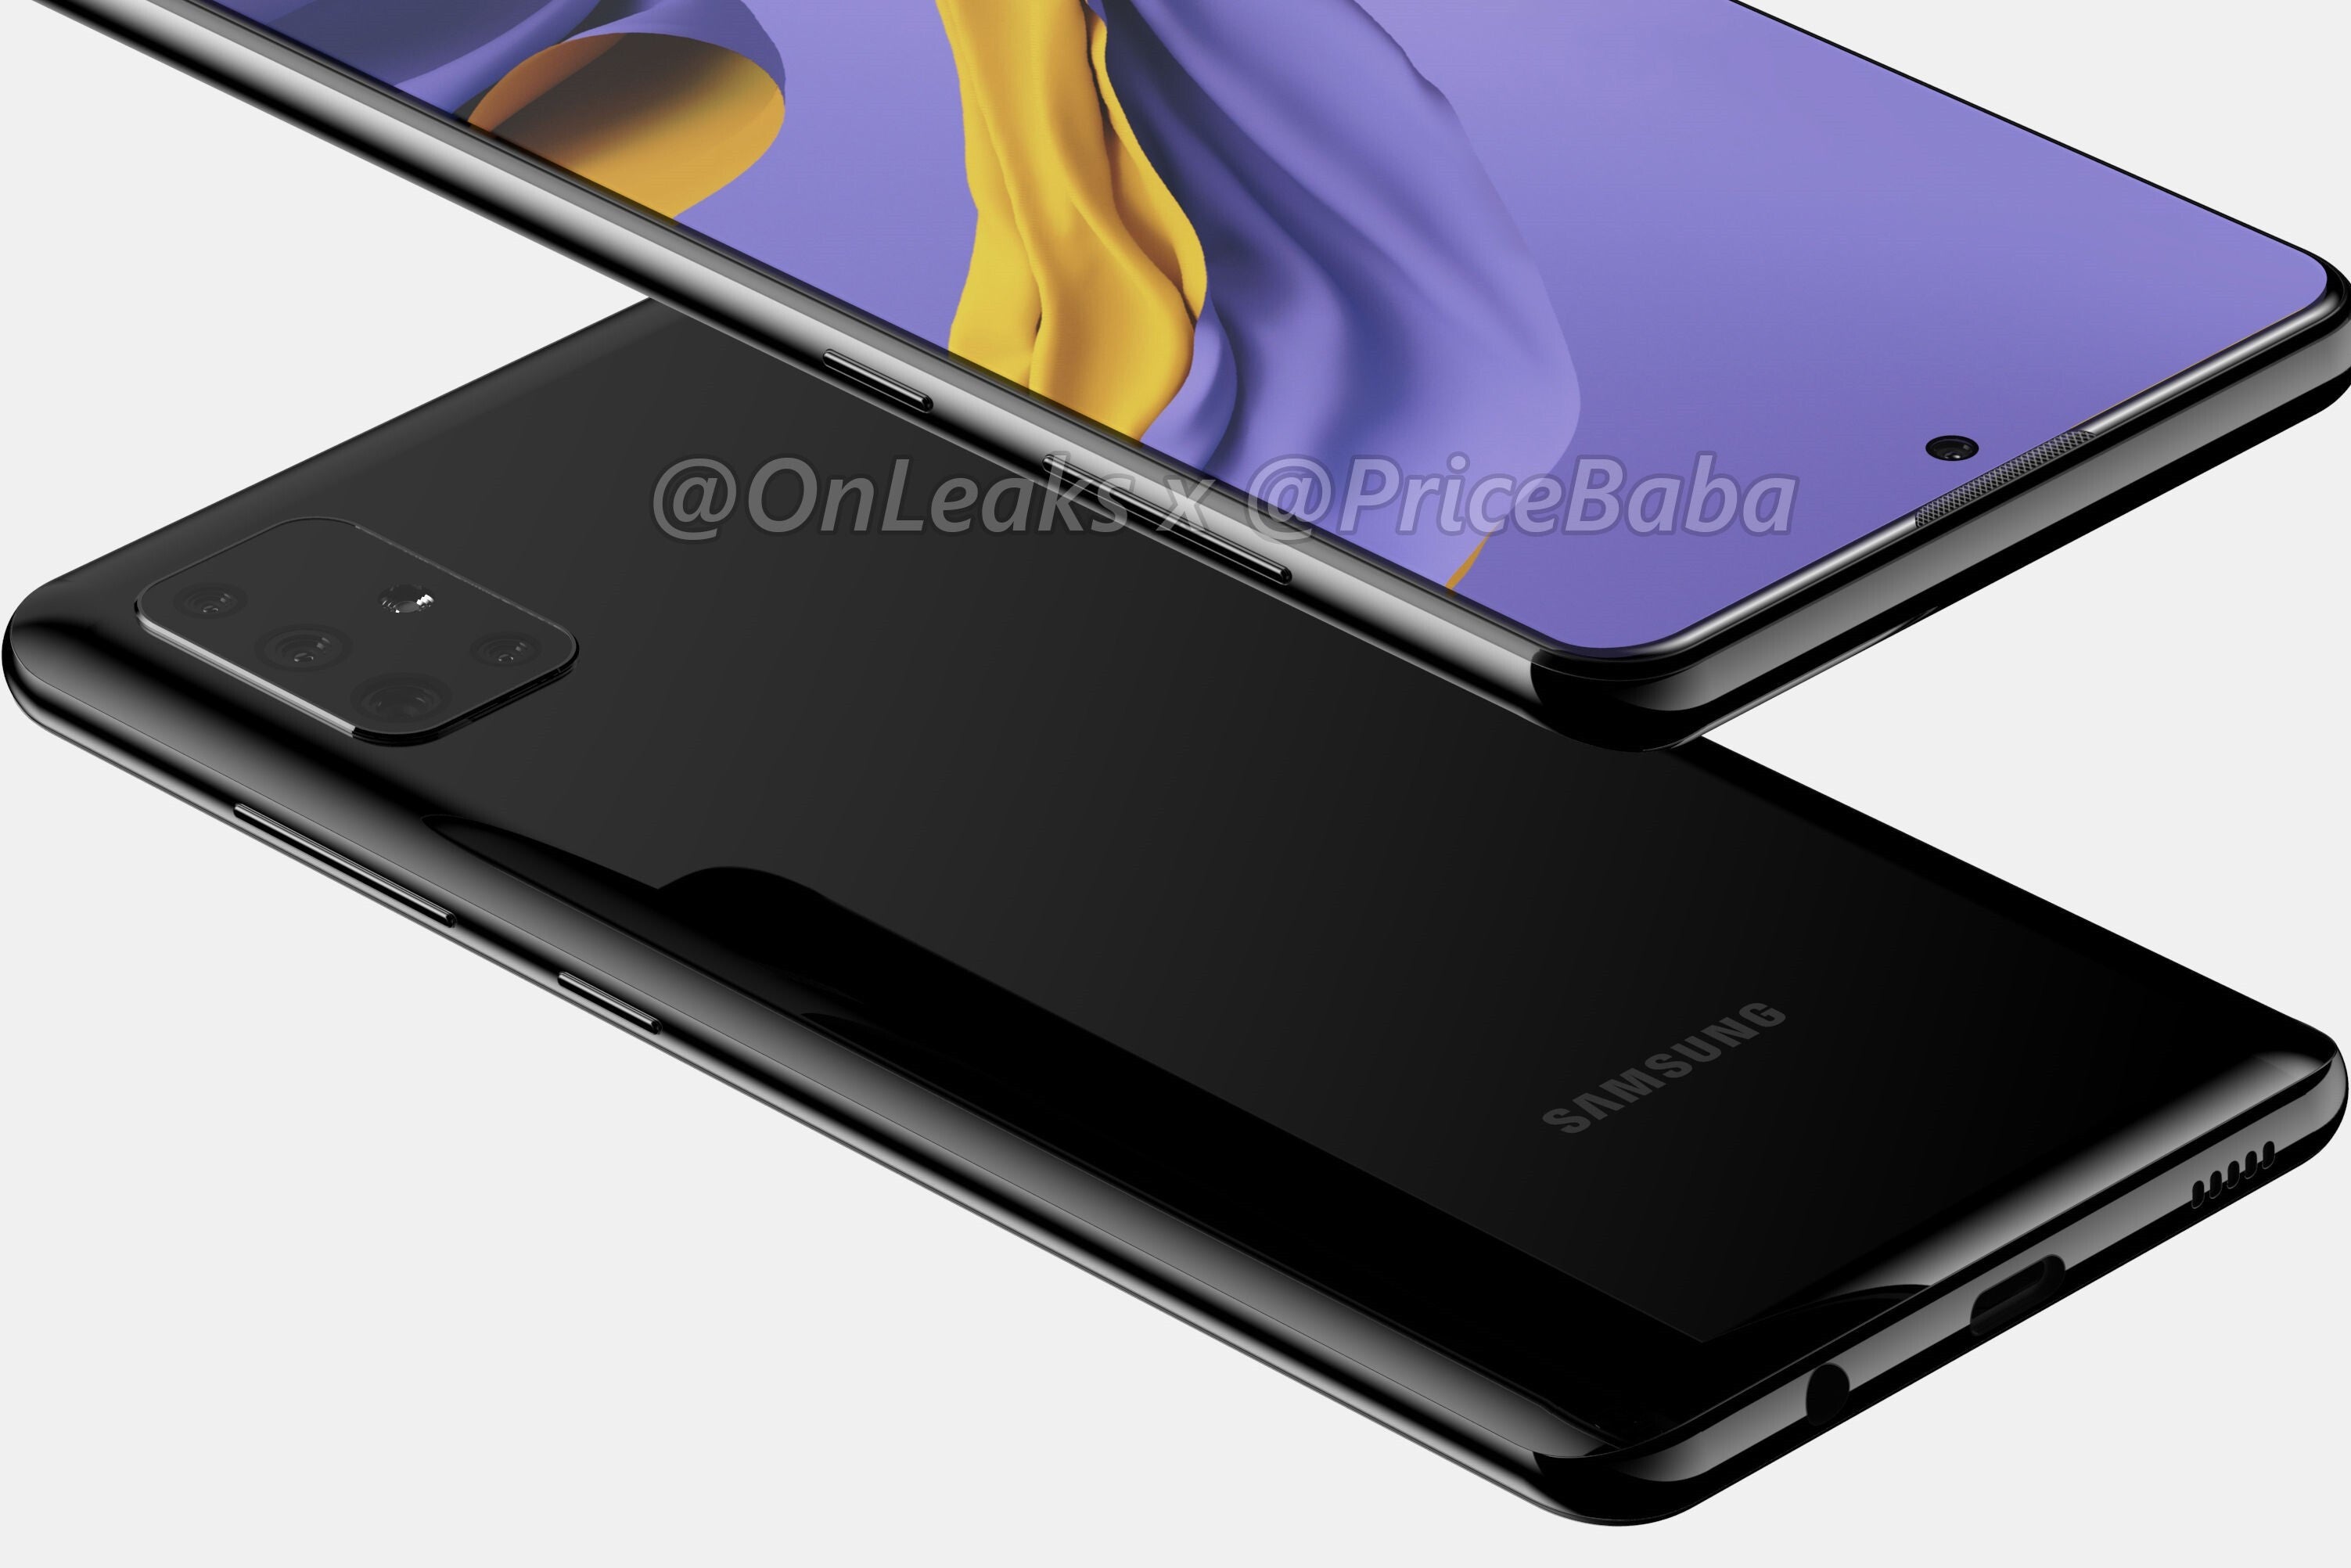 Samsung Galaxy A51 CAD-based render - Mid-range Galaxy A51 shows off its premium looks in leaked press shot